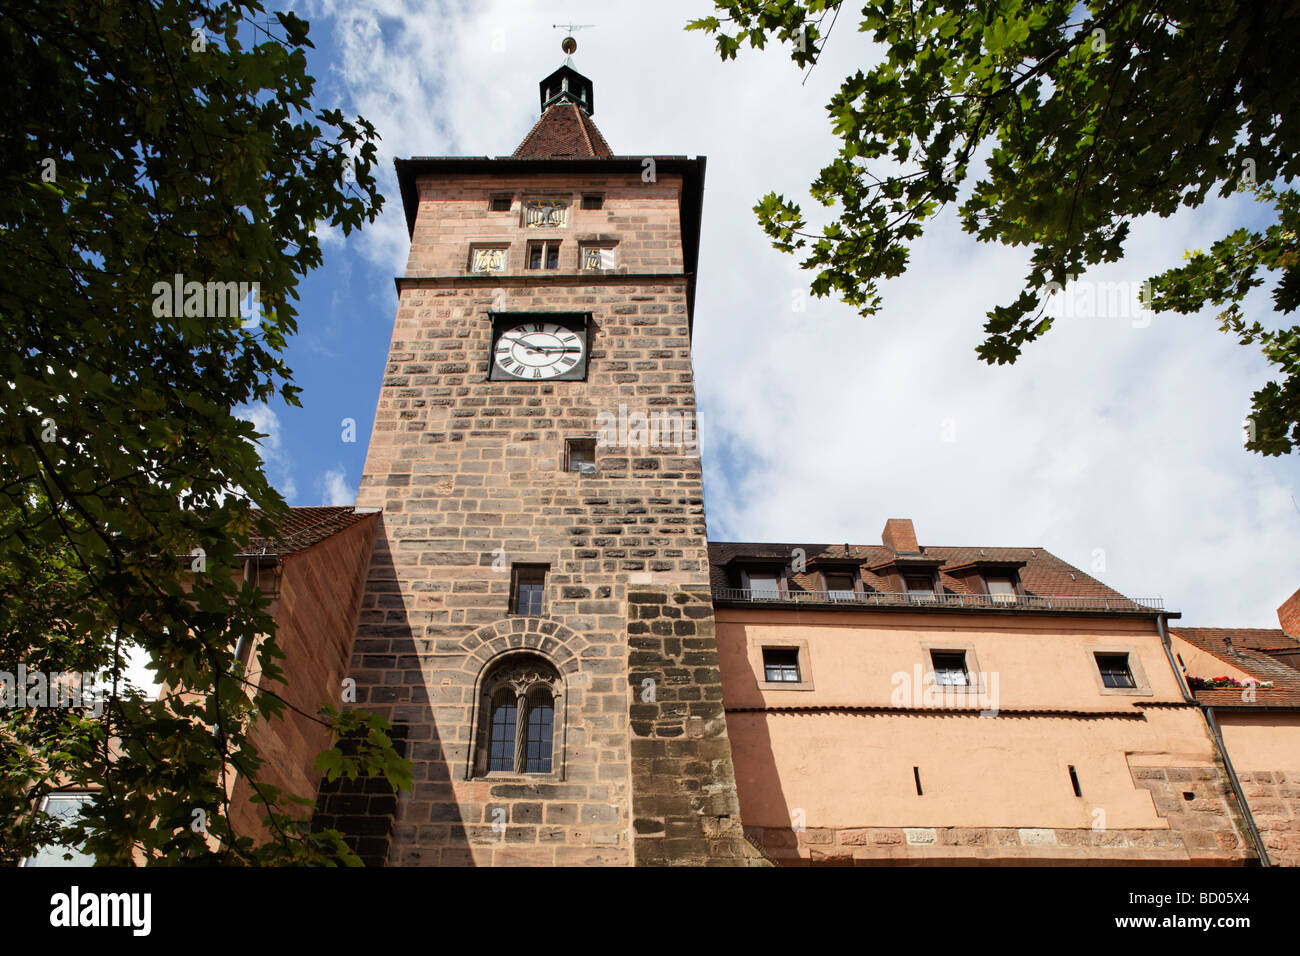 Laufer Schlagturm tower, built in 1250, Innerer Laufer Platz square, second last city fortification, city wall, old town, City  Stock Photo